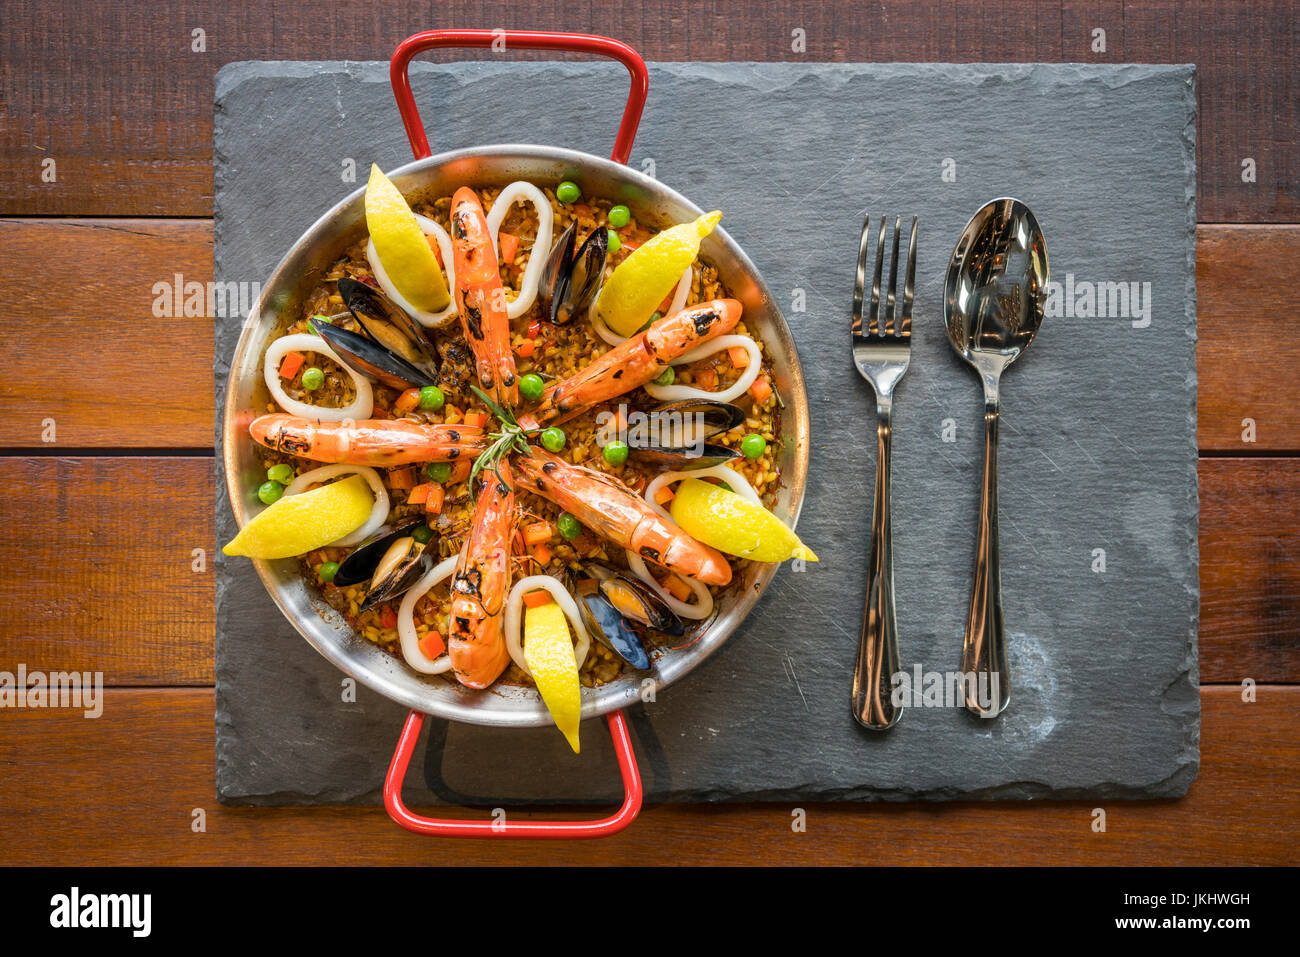 Paella with seafood vegetables and saffron served in the traditional pan top view. Stock Photo